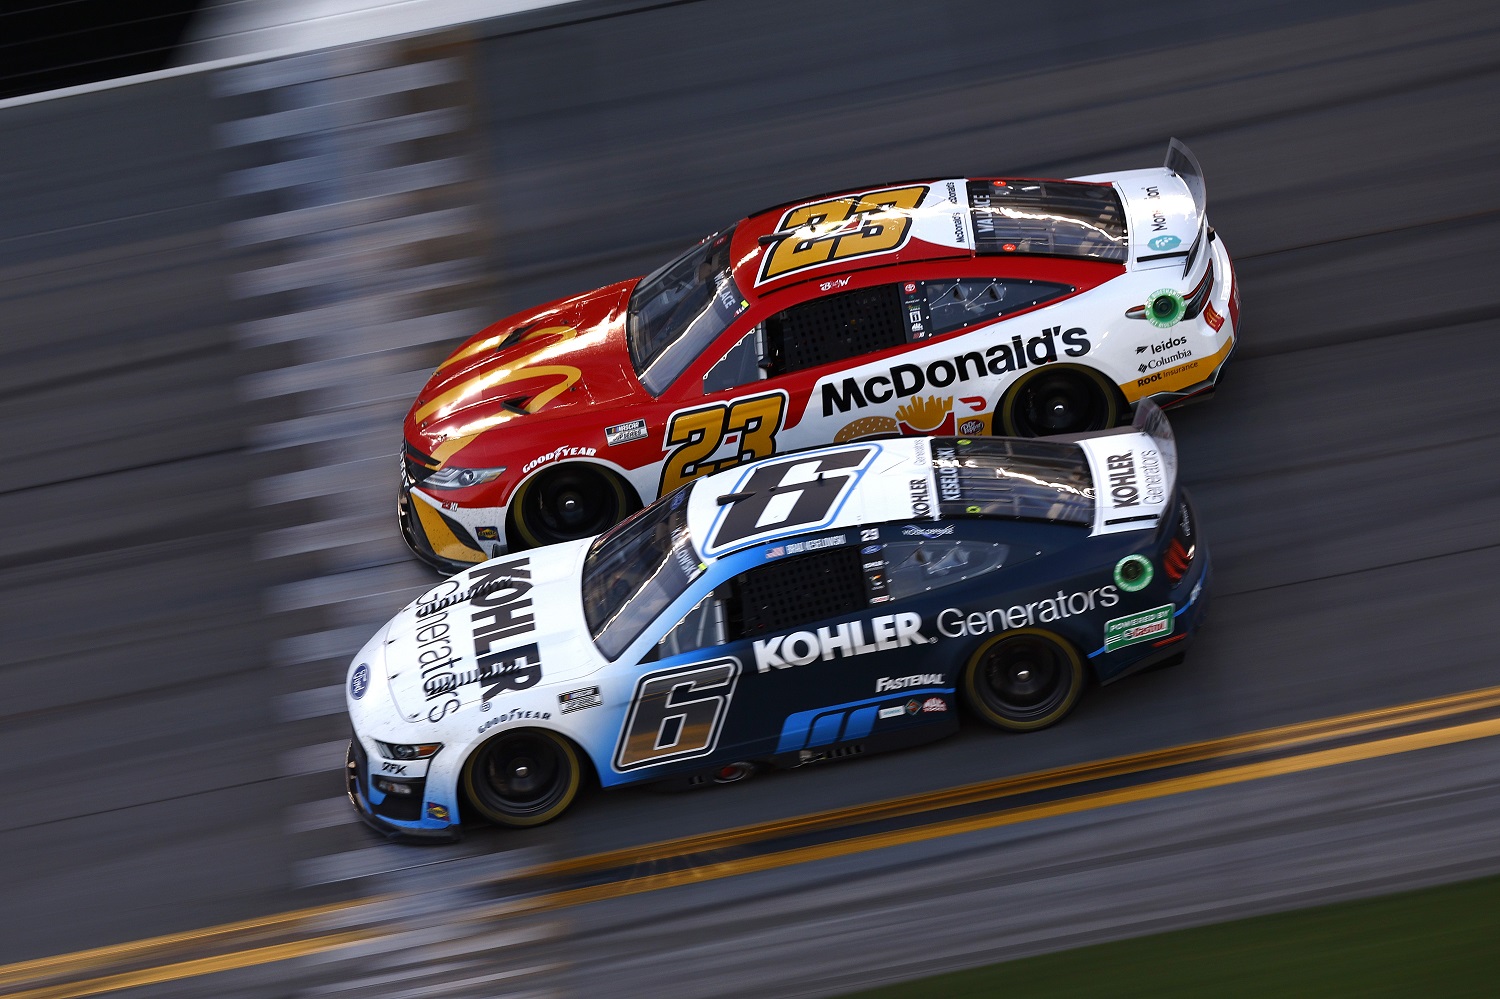 Brad Keselowski, driver of the No. 6 Ford, and Bubba Wallace, driver of the No. 23 Toyota, race during the NASCAR Daytona 500 at Daytona International Speedway on Feb. 20, 2022.